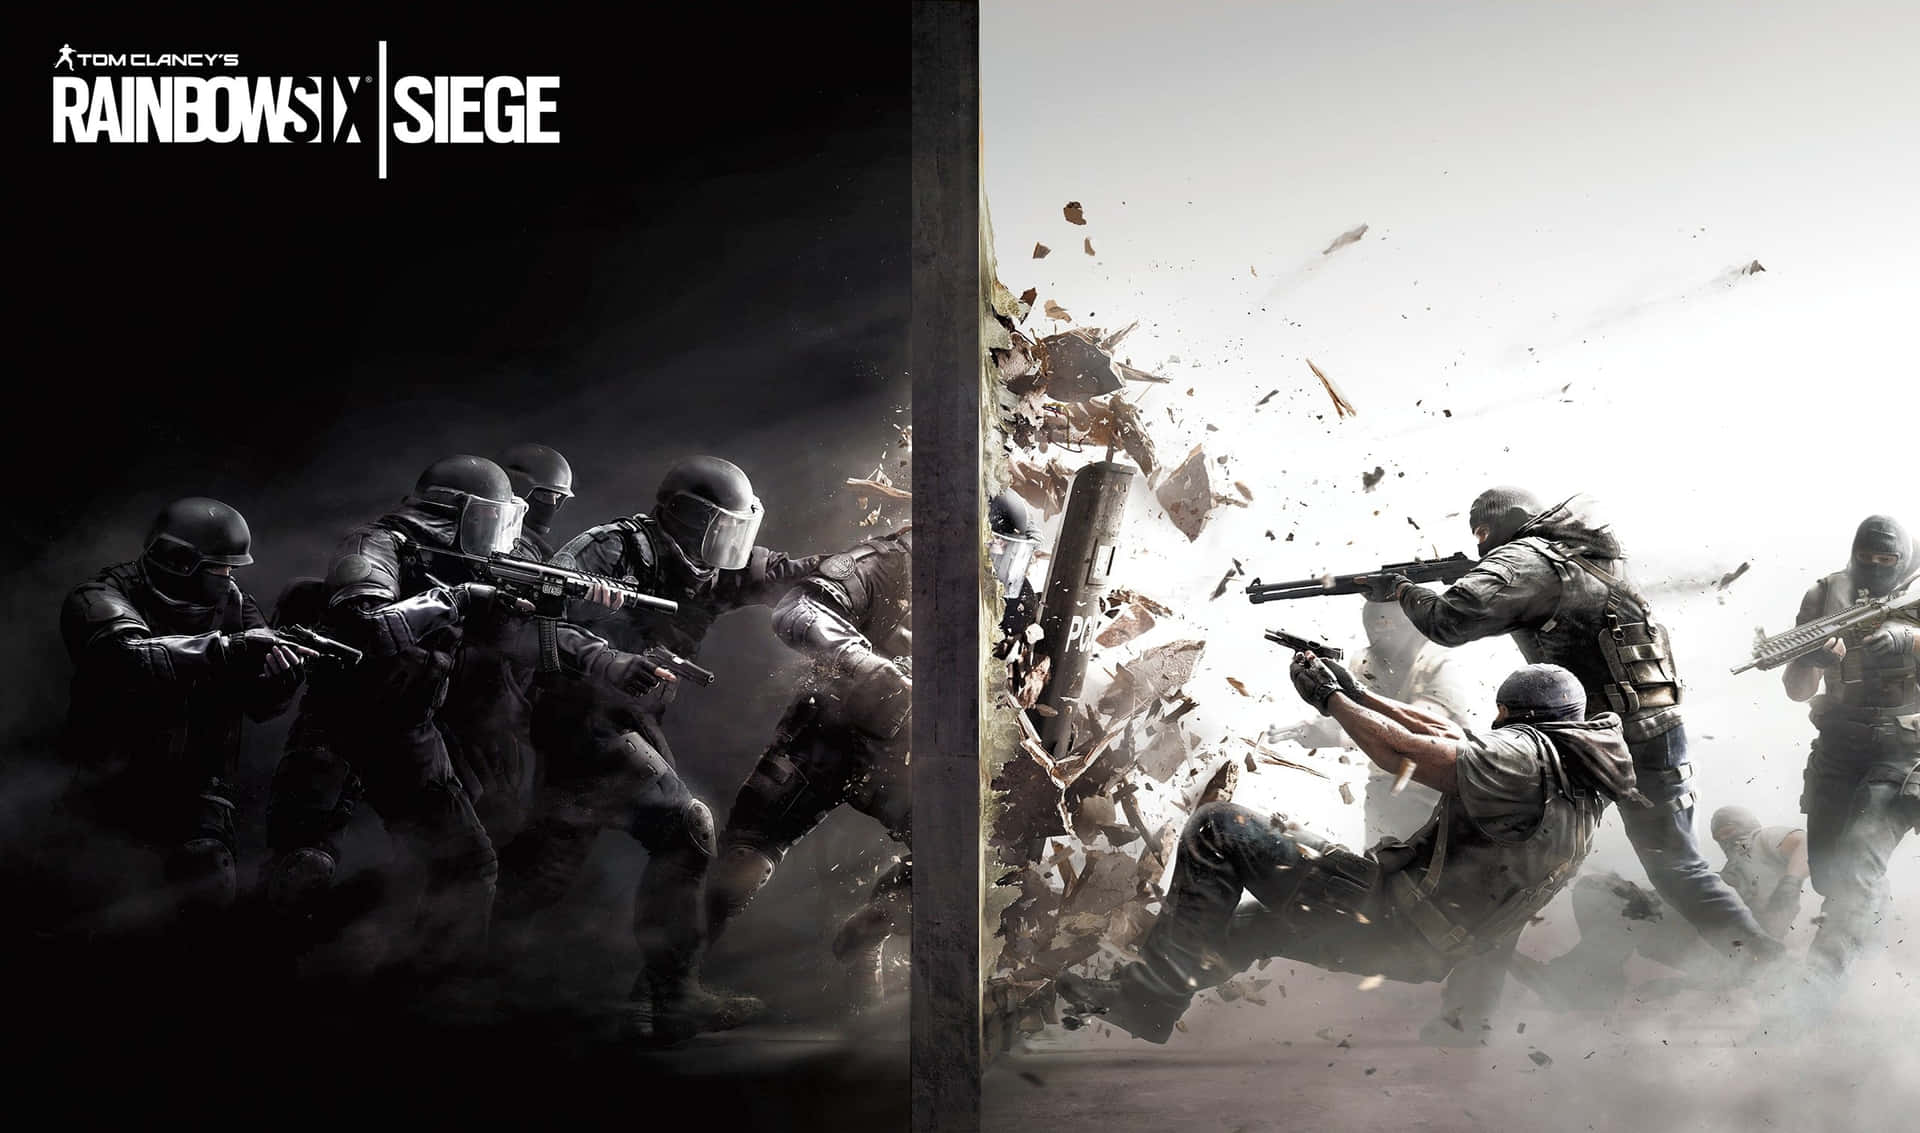 Get Ready for Epic Battle in Rainbow Six Siege